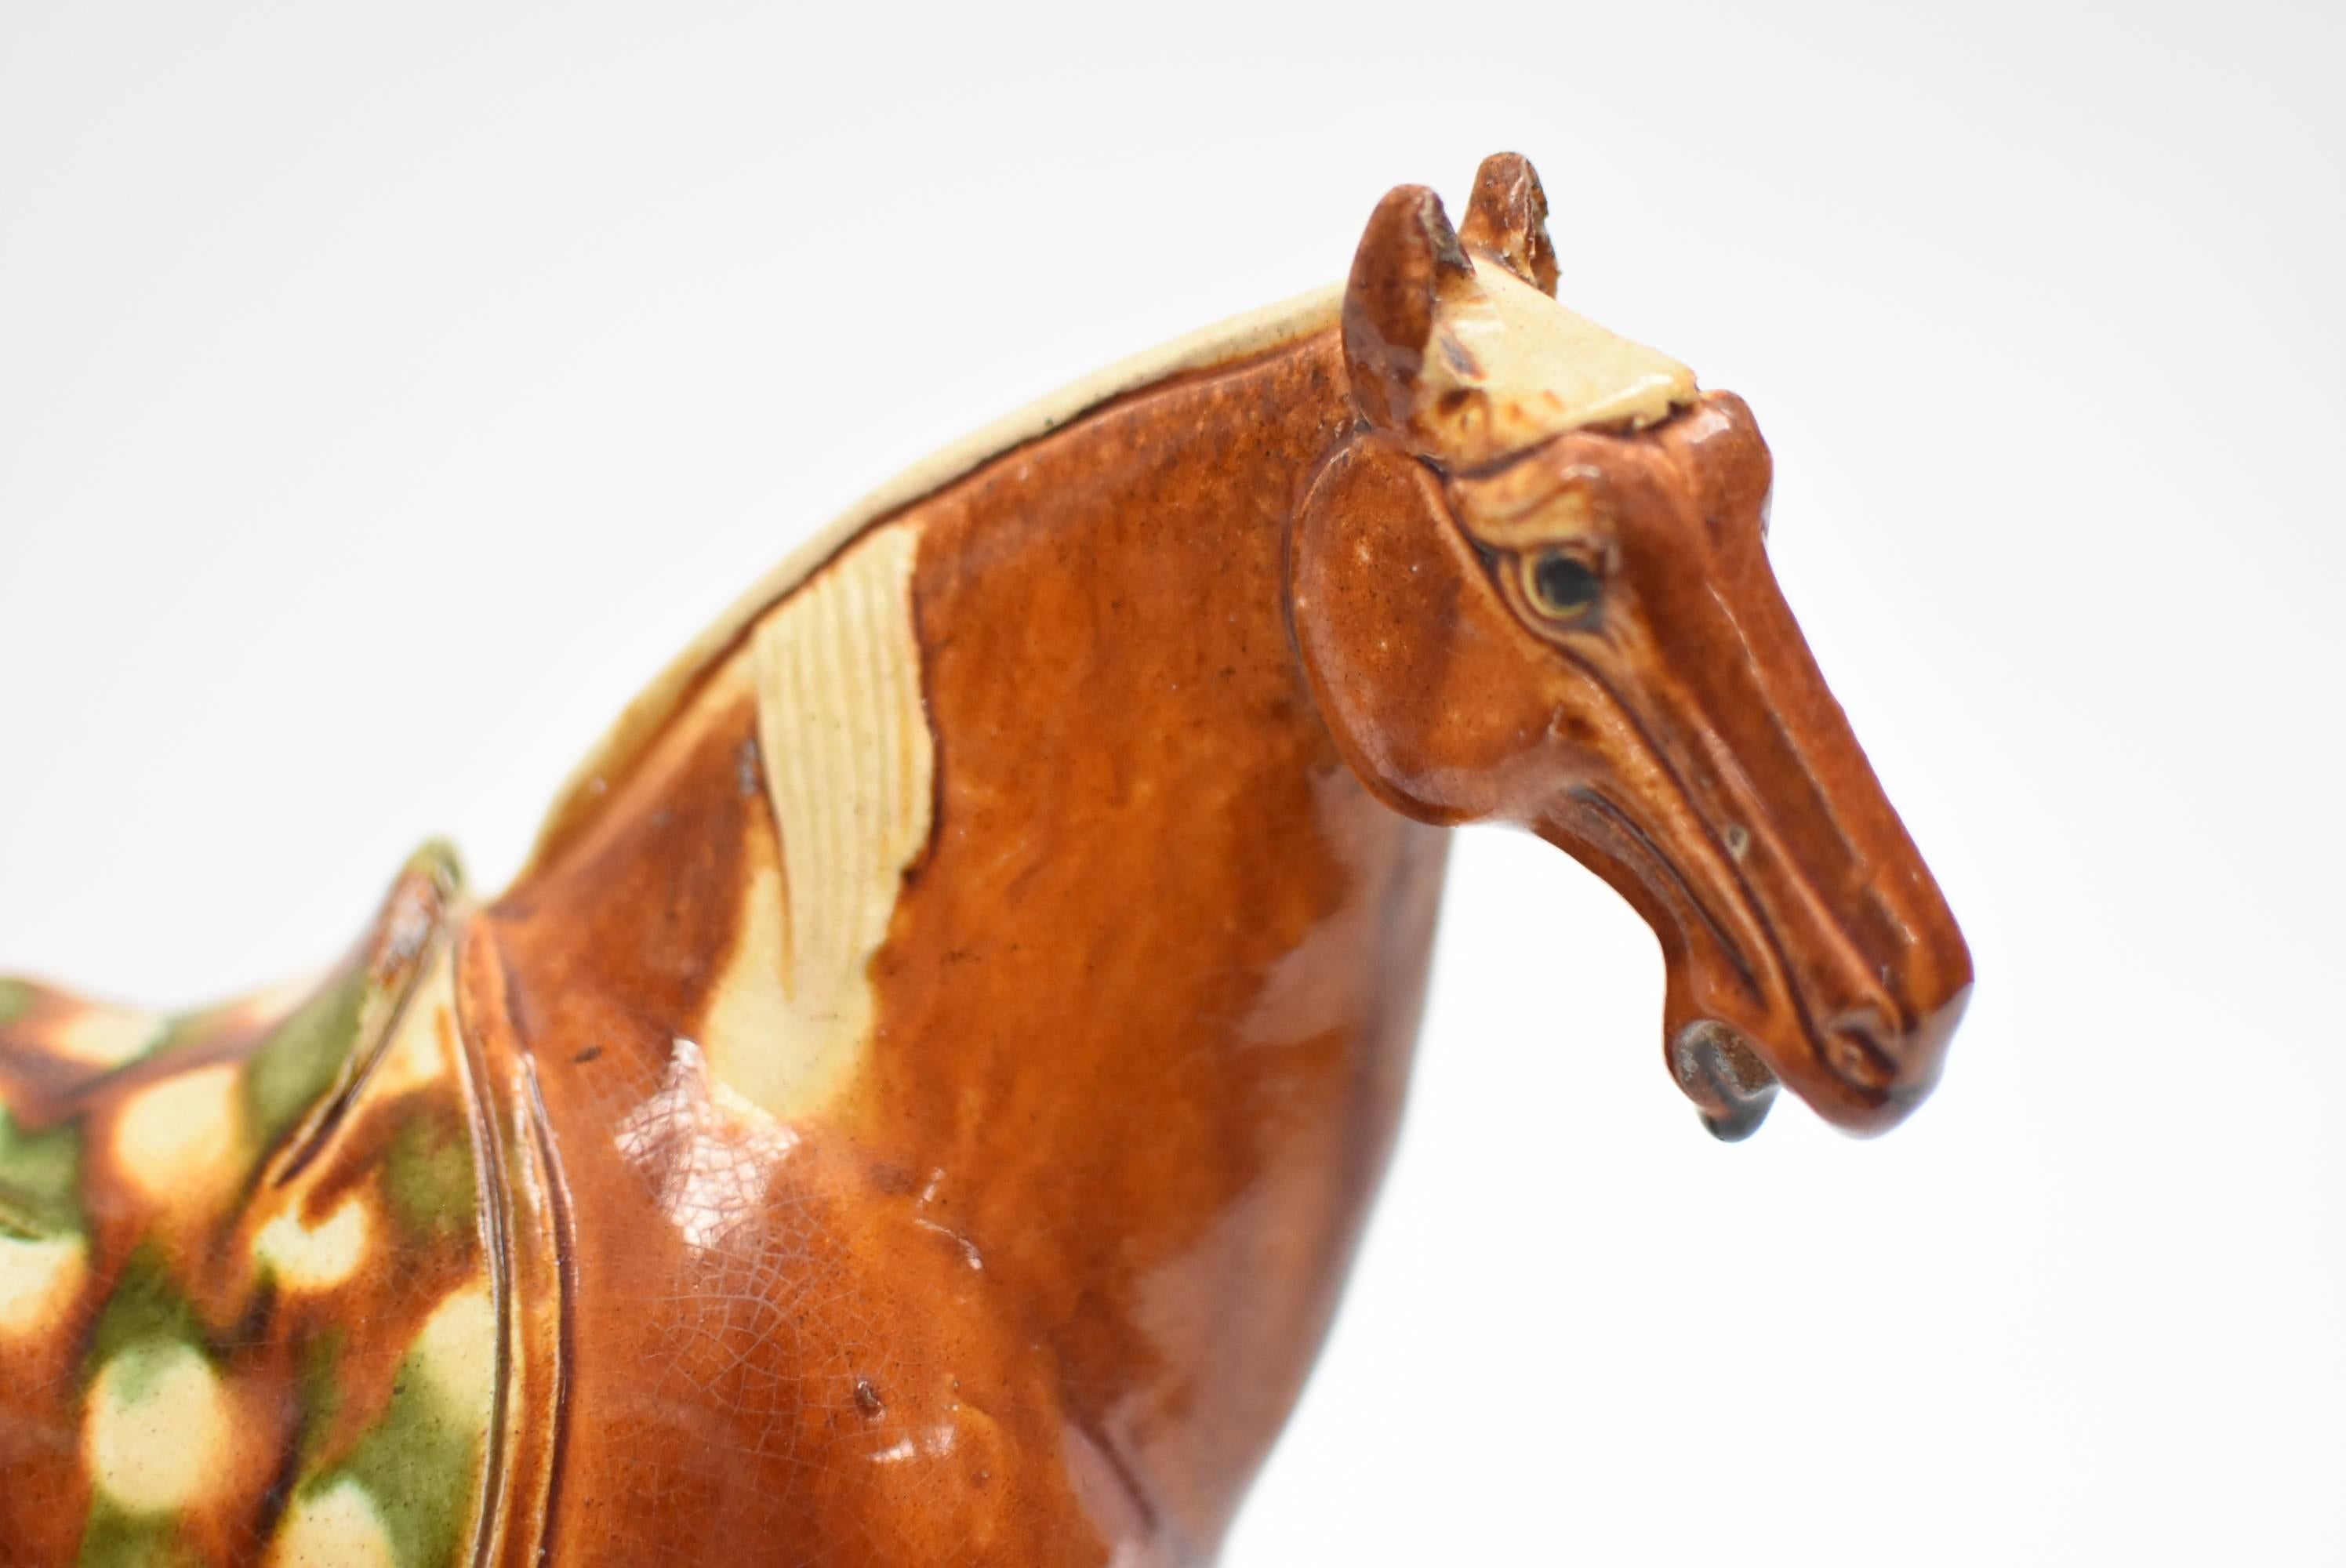 This pair of beautiful terracotta horses are handmade and painted using the ancient tri-glaze techniques. A true work of art, the splendid glossy glaze is distinctive of Tang San Cai style. Glaze is skillfully applied achieving high artistic effect.